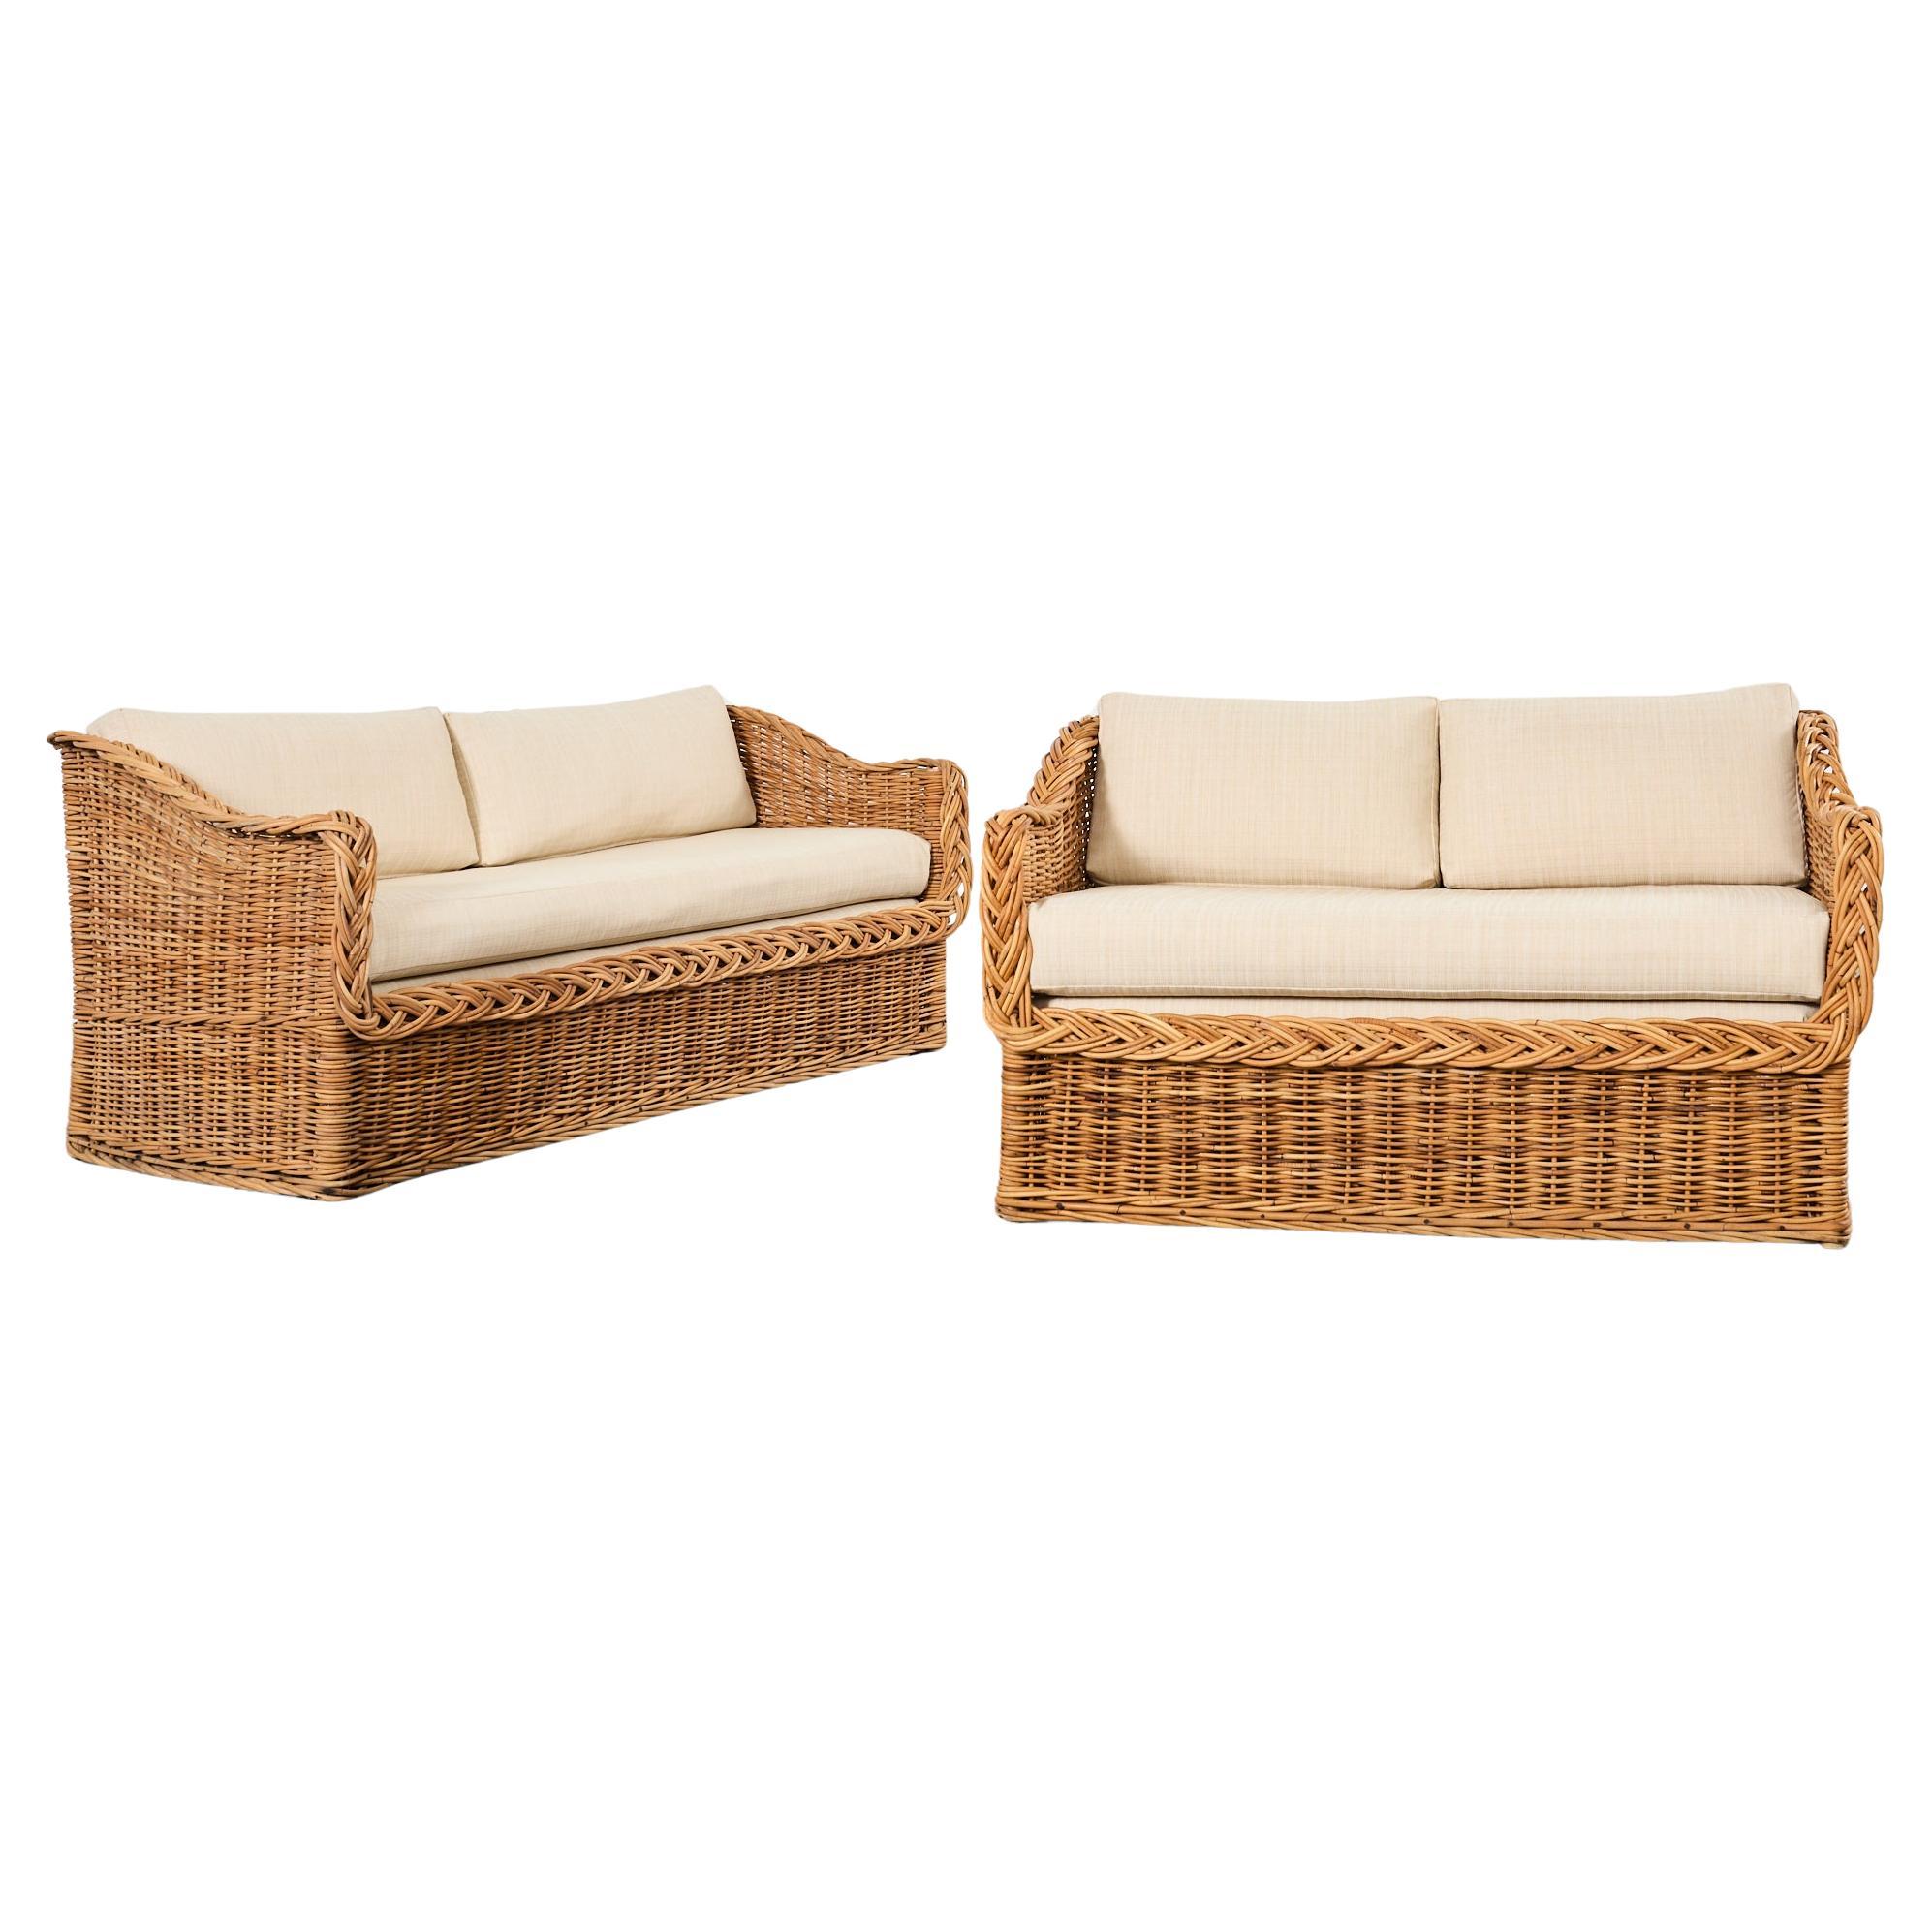 Michael Taylor Style Wicker Rattan Sofa and Settee by Wicker Works For Sale